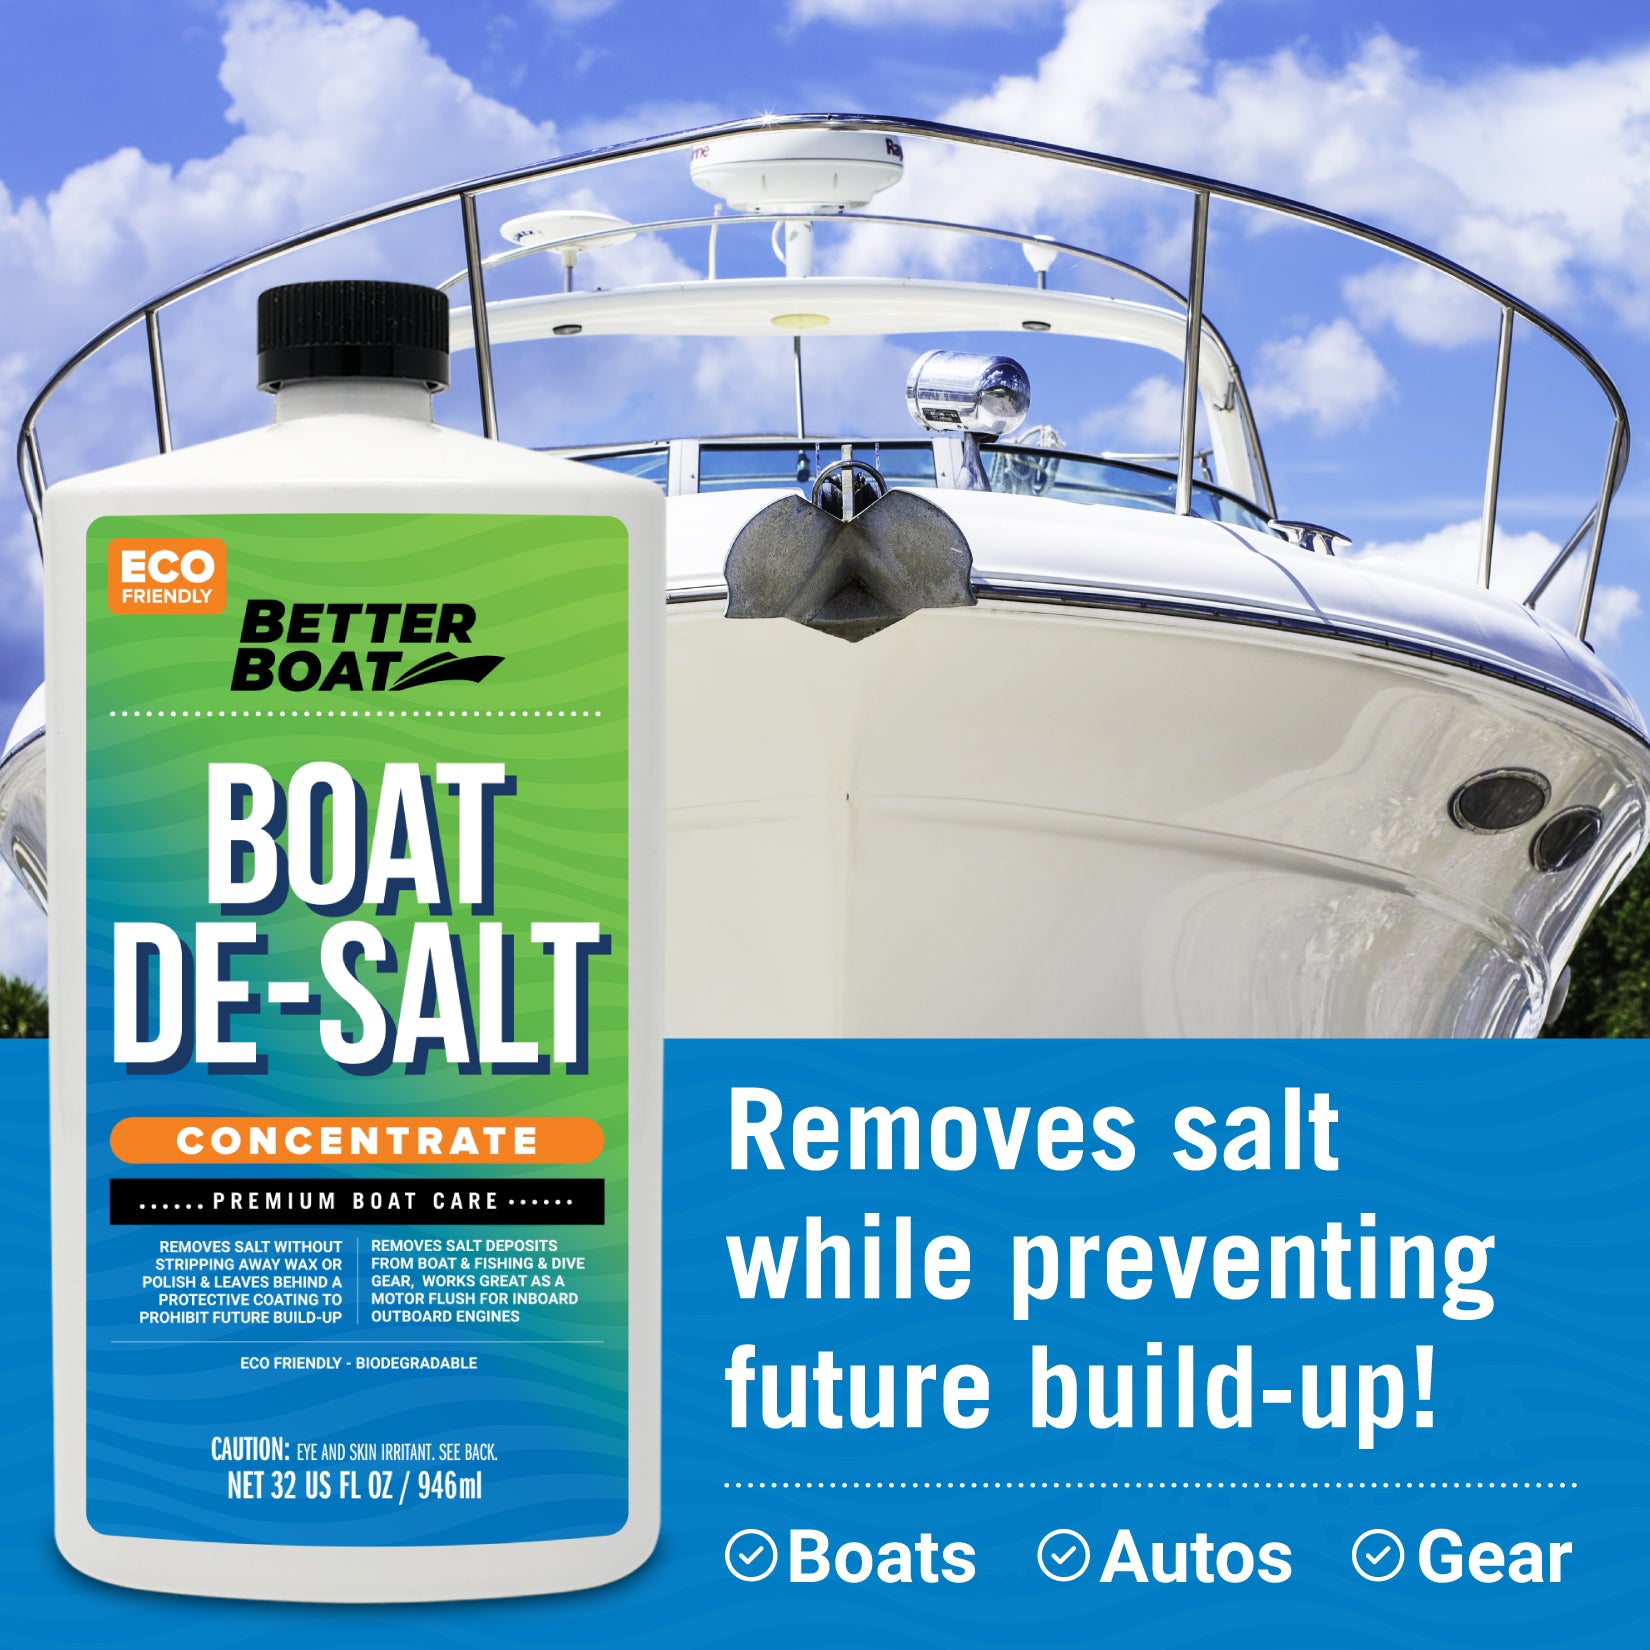 Salty Boater - Salt Remover for Boats - Boat Soap Marine - Salt Away for  Boats - Salt Remover Engine Flush - Boat Cleaner - Boat Cleaning Supplies